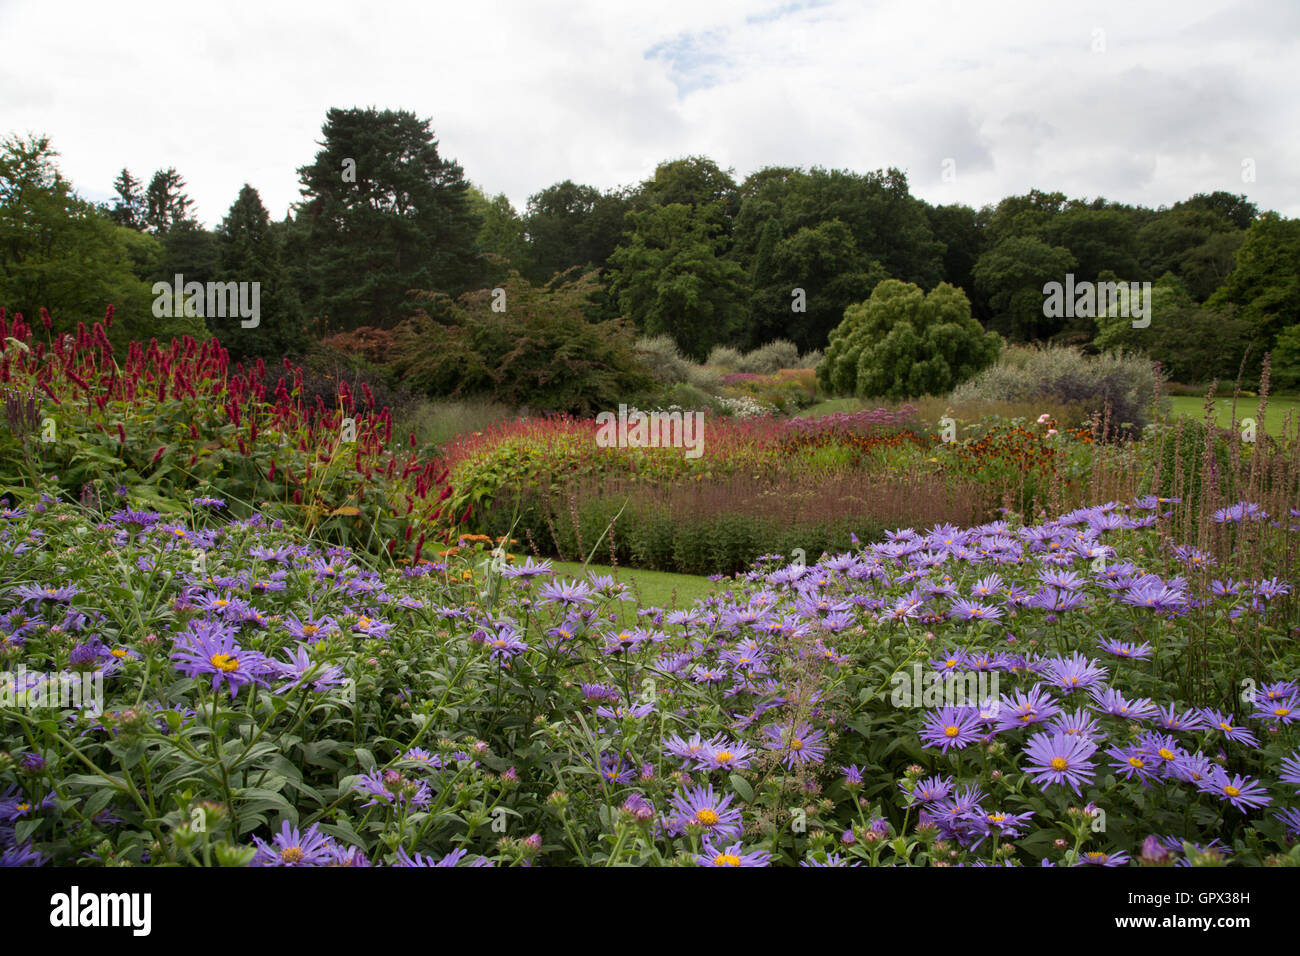 Harrogate, UK. Colourful flowers still visible as summer comes to a close at RHS Garden Harlow Carr in Harrogate, North Yorkshir Stock Photo